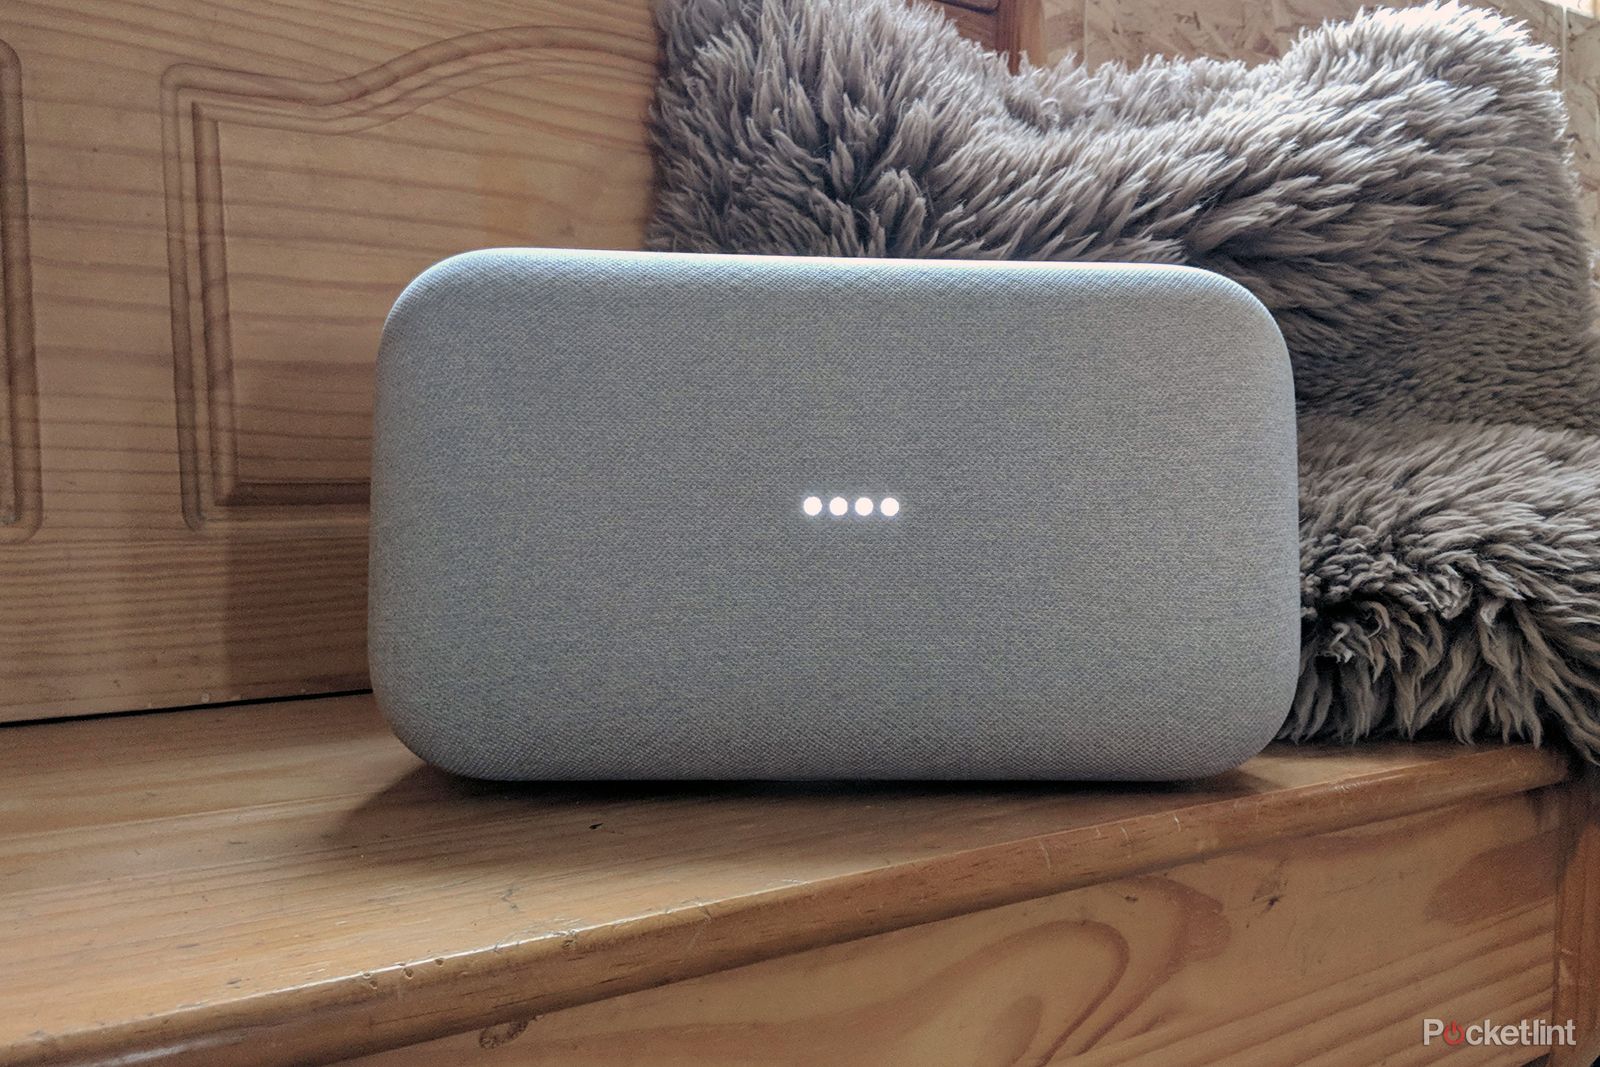 Google is discontinuing the Google Home Max photo 1